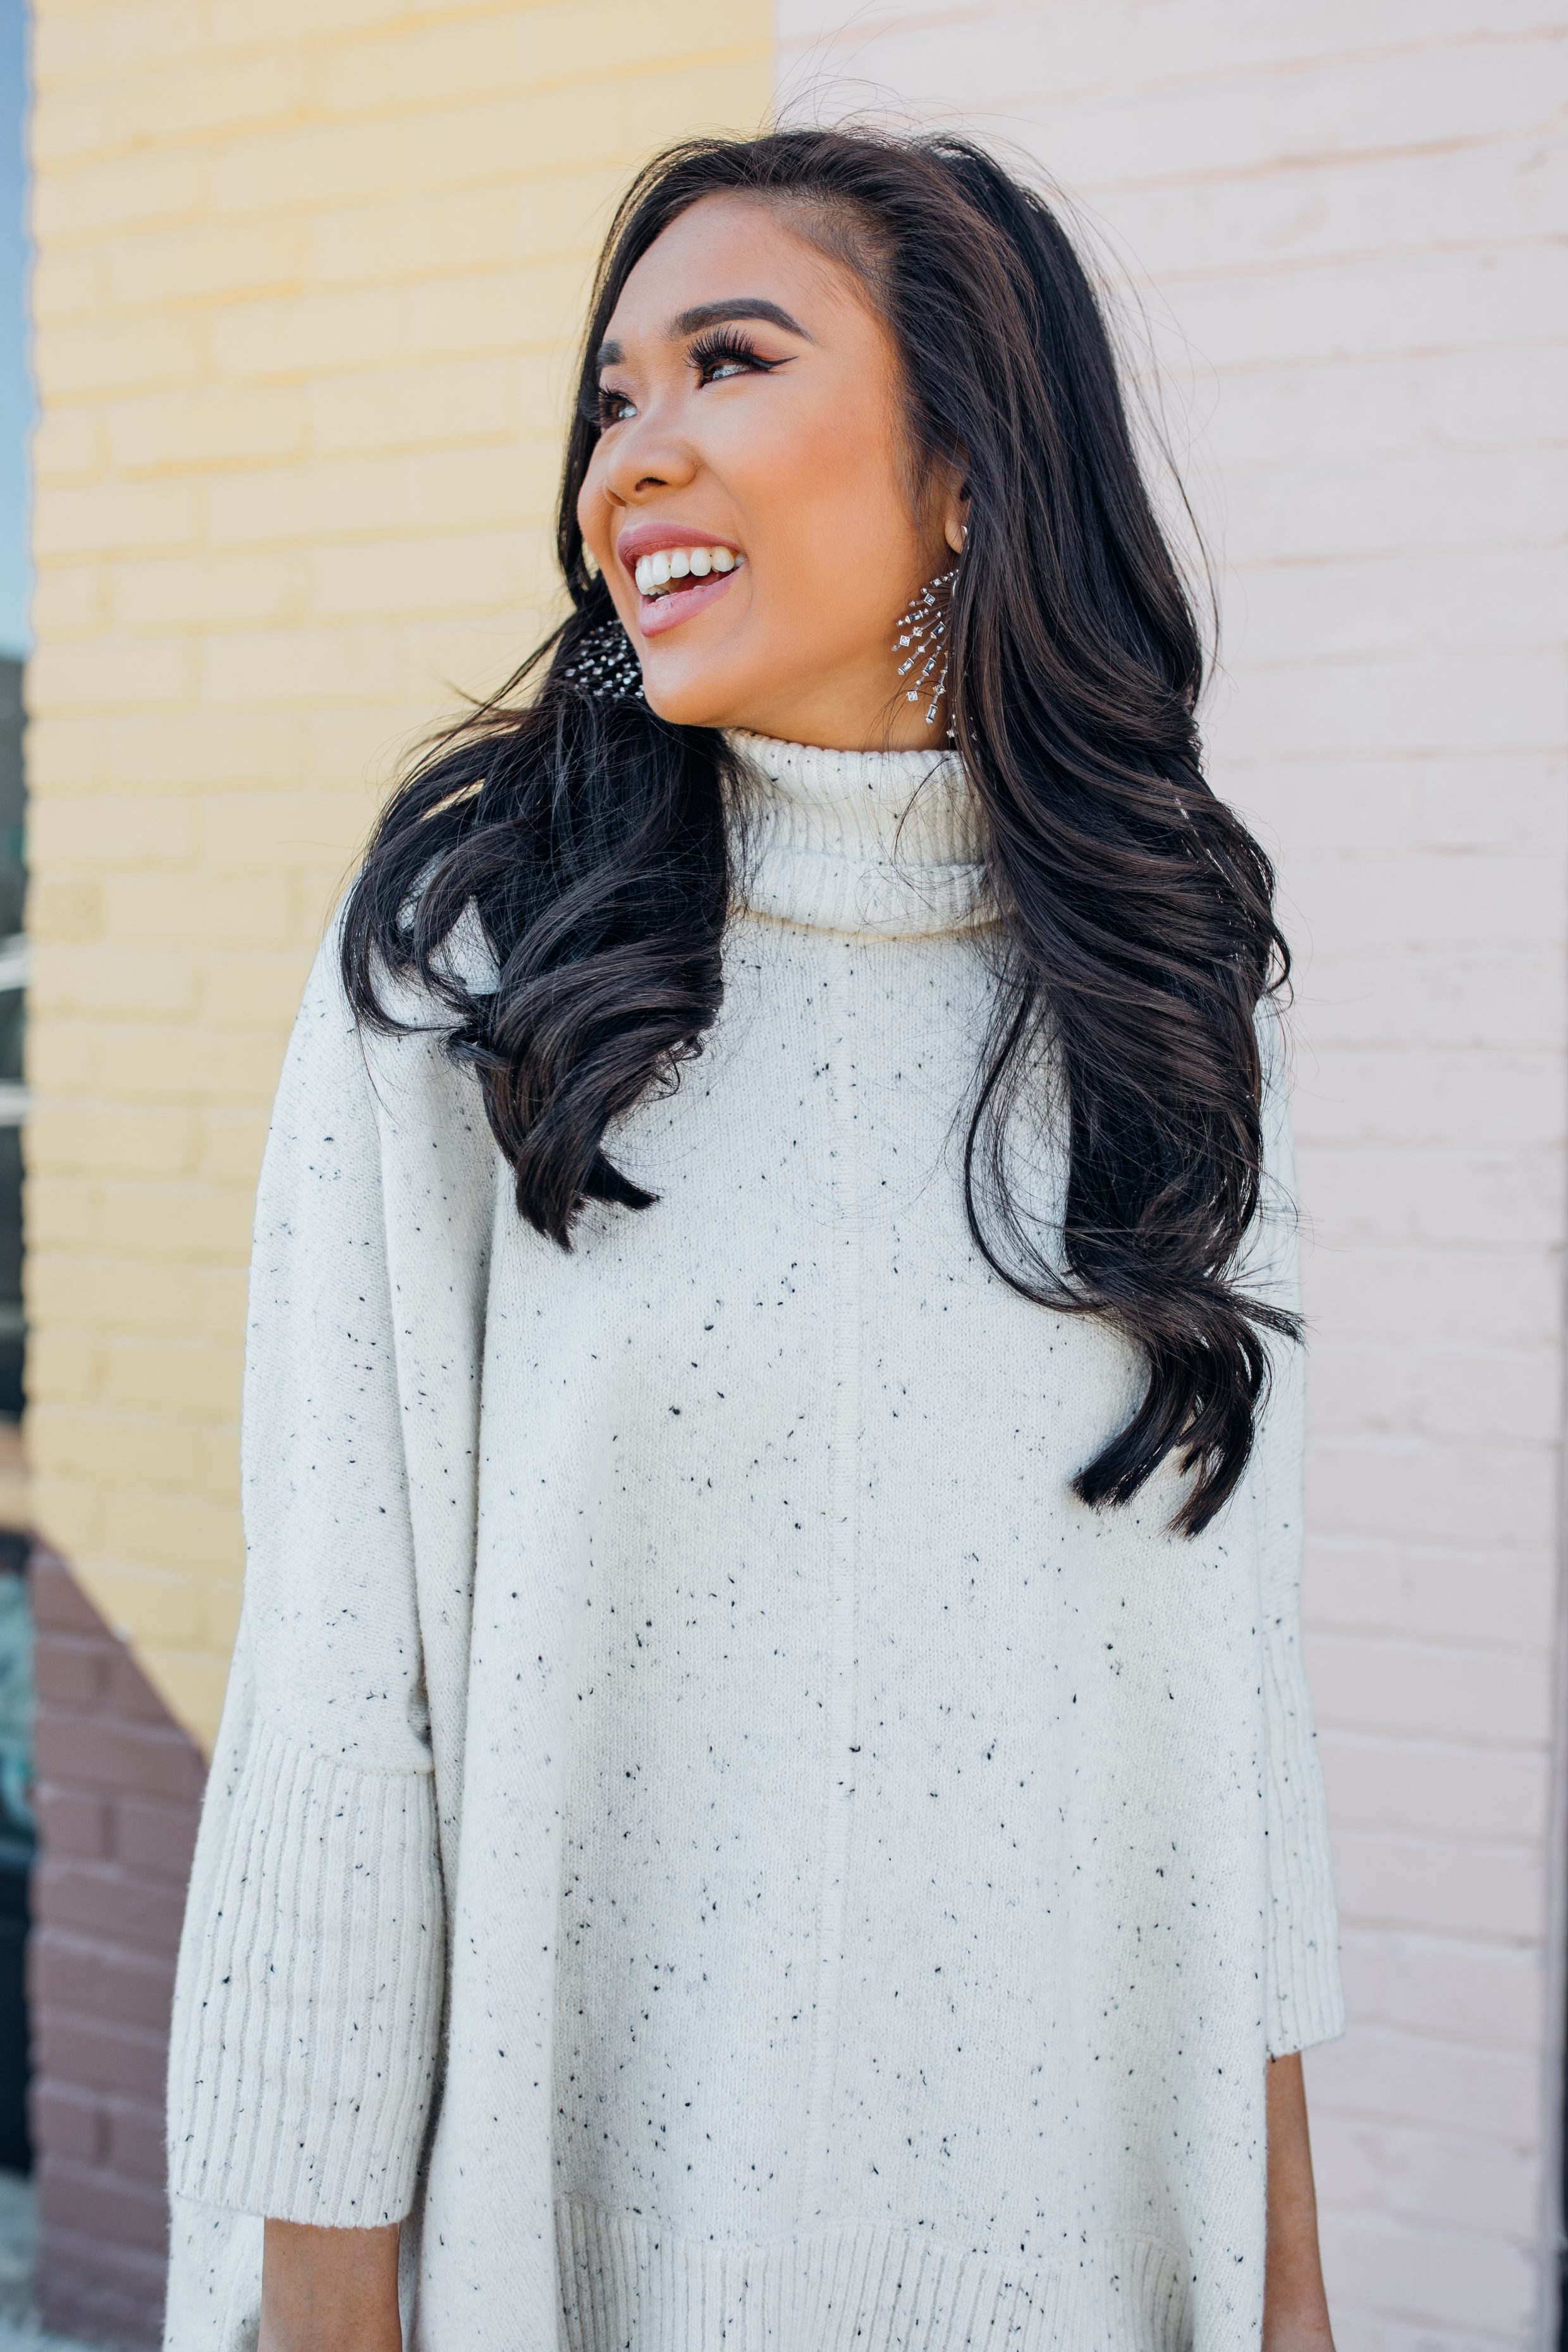 Blogger Hoang-Kim shares a casual winter outfit with a turtleneck poncho and Kendra Scott earrings